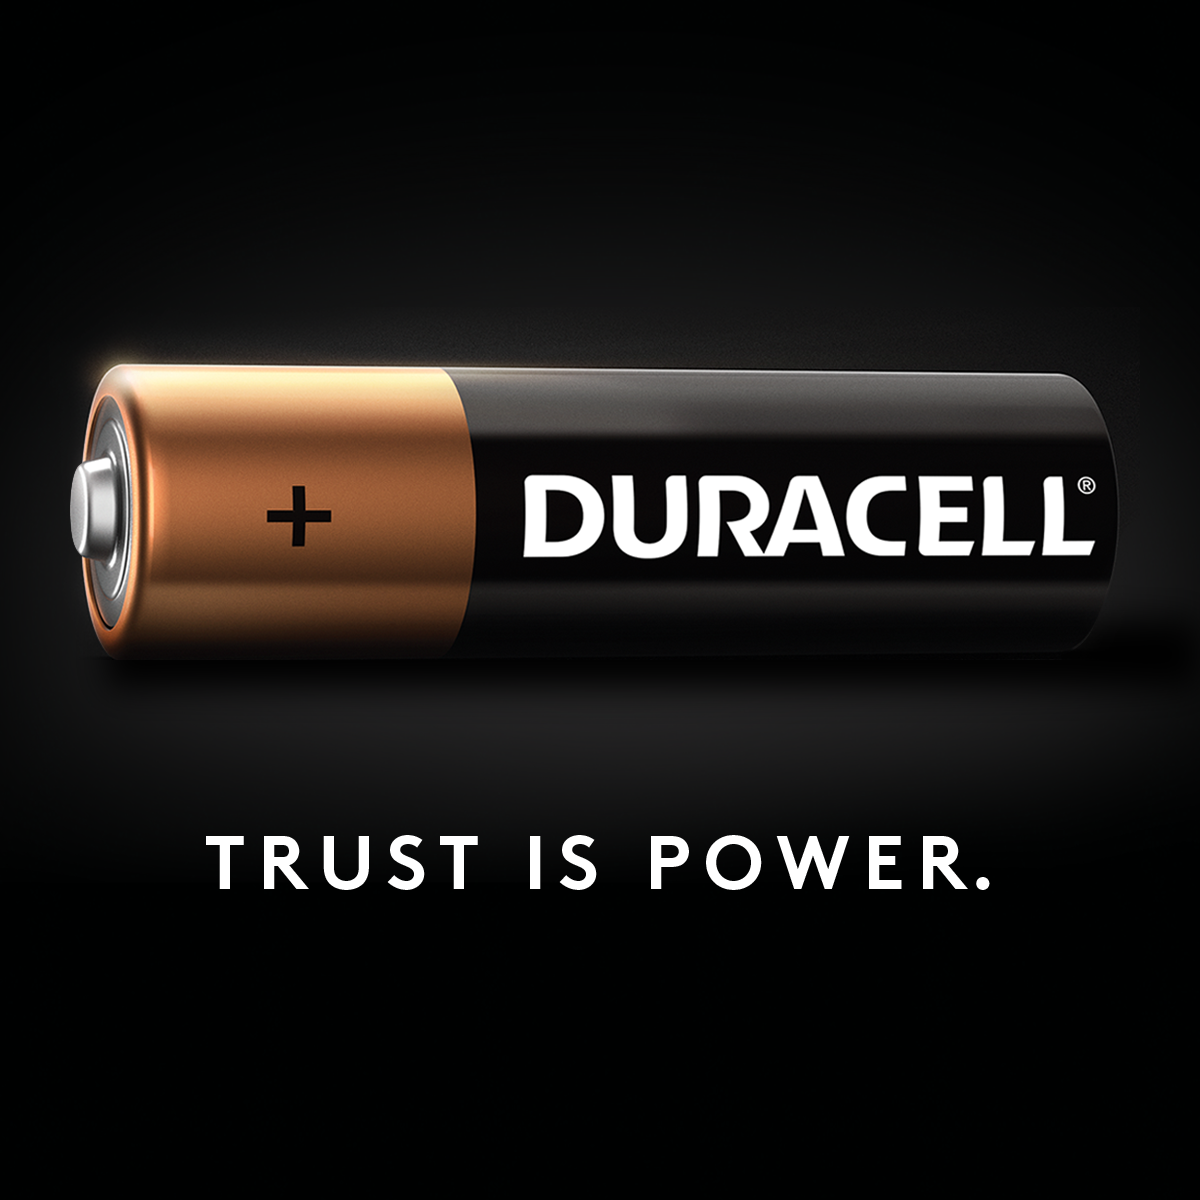 Duracell 1.5V Quantum Alkaline AAA Batteries with PowerCheck, 6 Pack - image 3 of 8